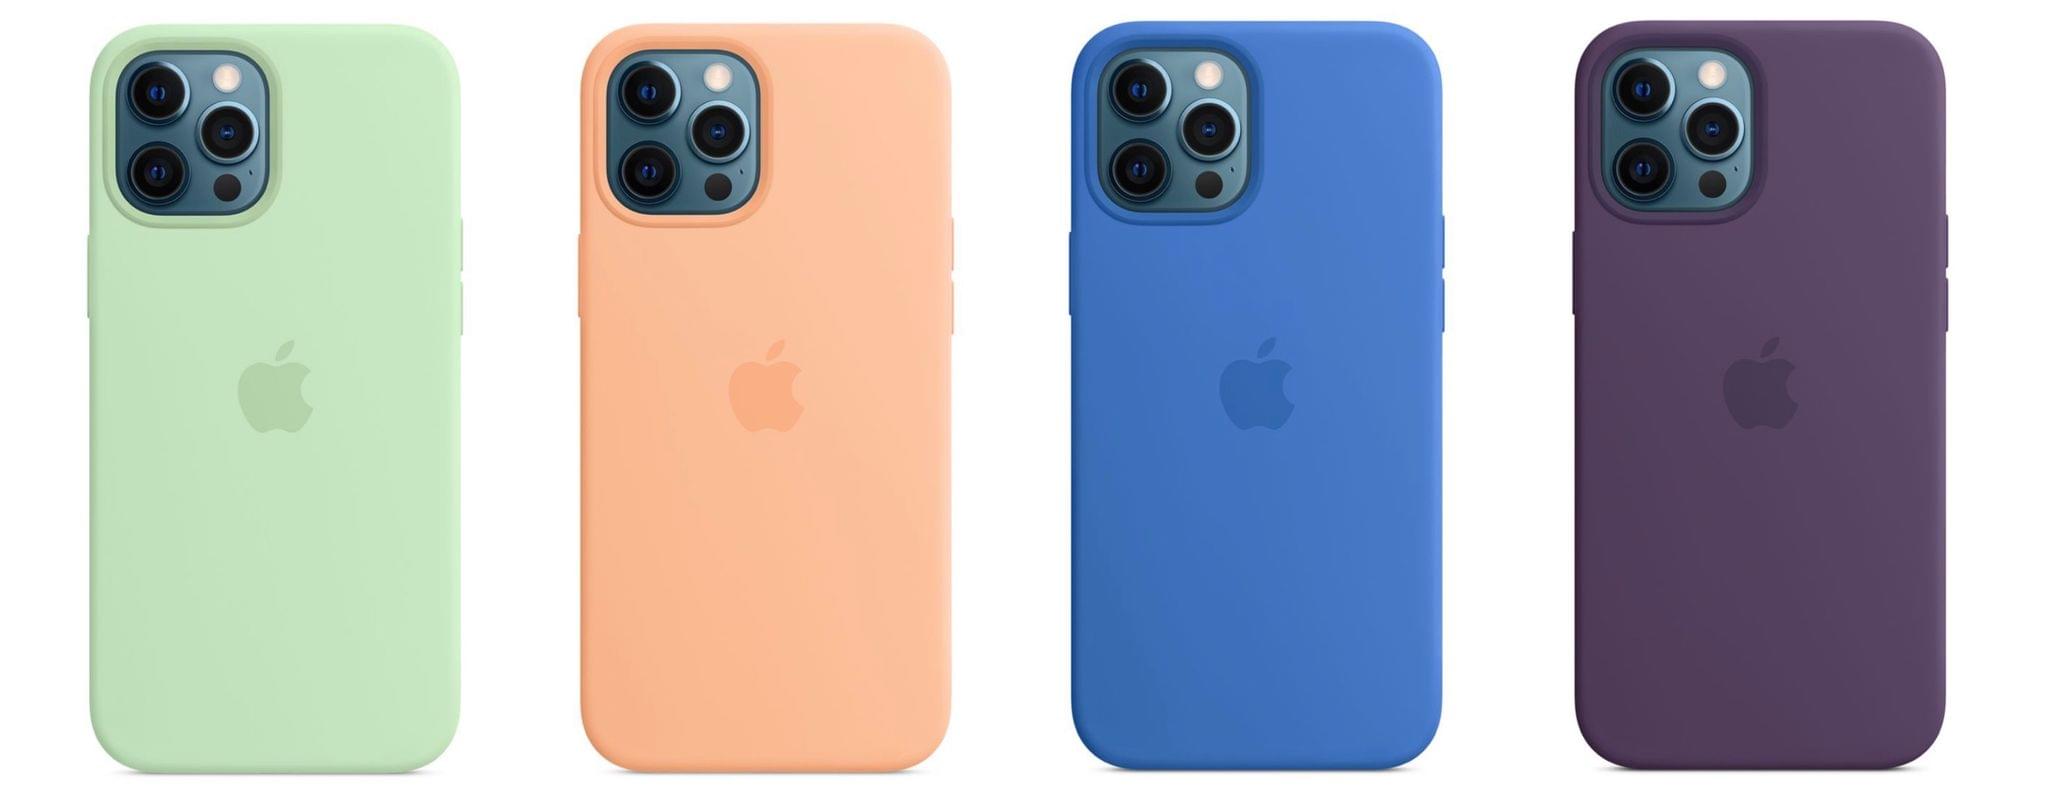 The new Silicone cases.